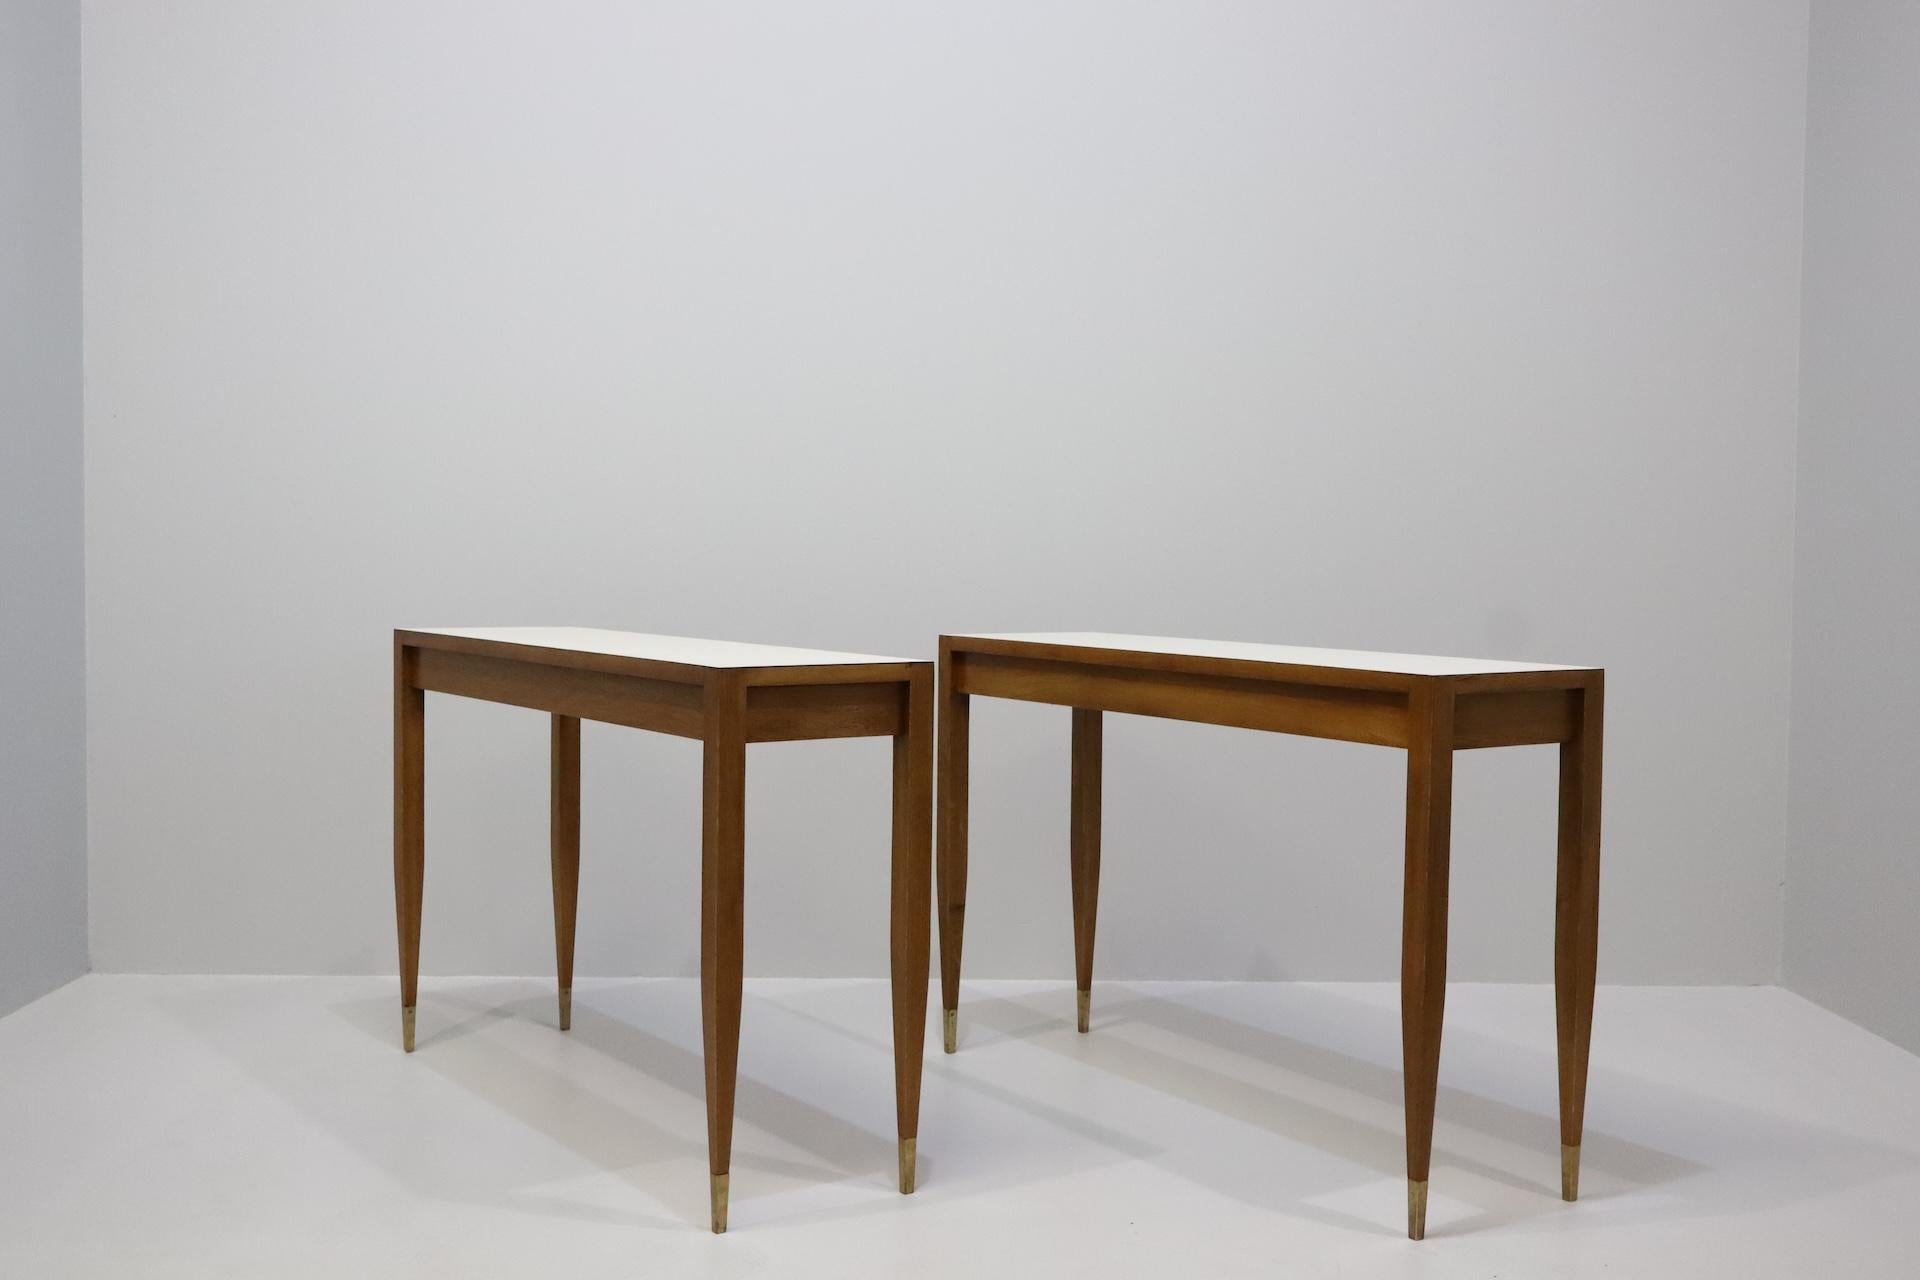 
Pair of console tables by Gio Ponti, Manufactured for the Parco dei Principe Hotel Sorrento, circa 1961 Ash Formica Brass
Giordano Chiesa
Italy, 1964
